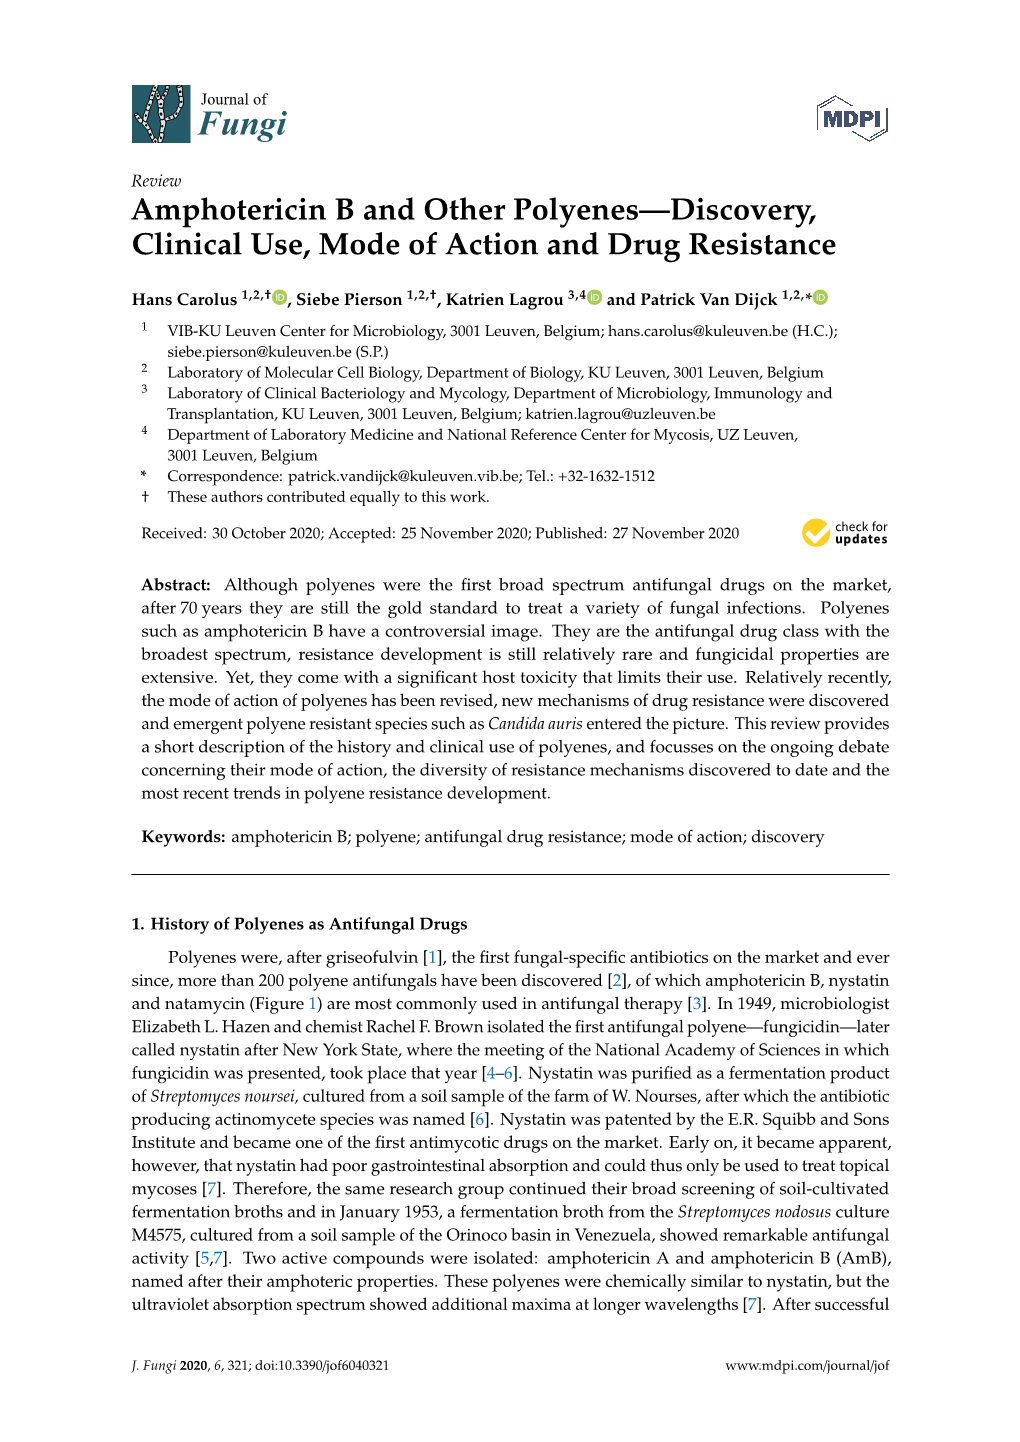 Amphotericin B and Other Polyenes—Discovery, Clinical Use, Mode of Action and Drug Resistance